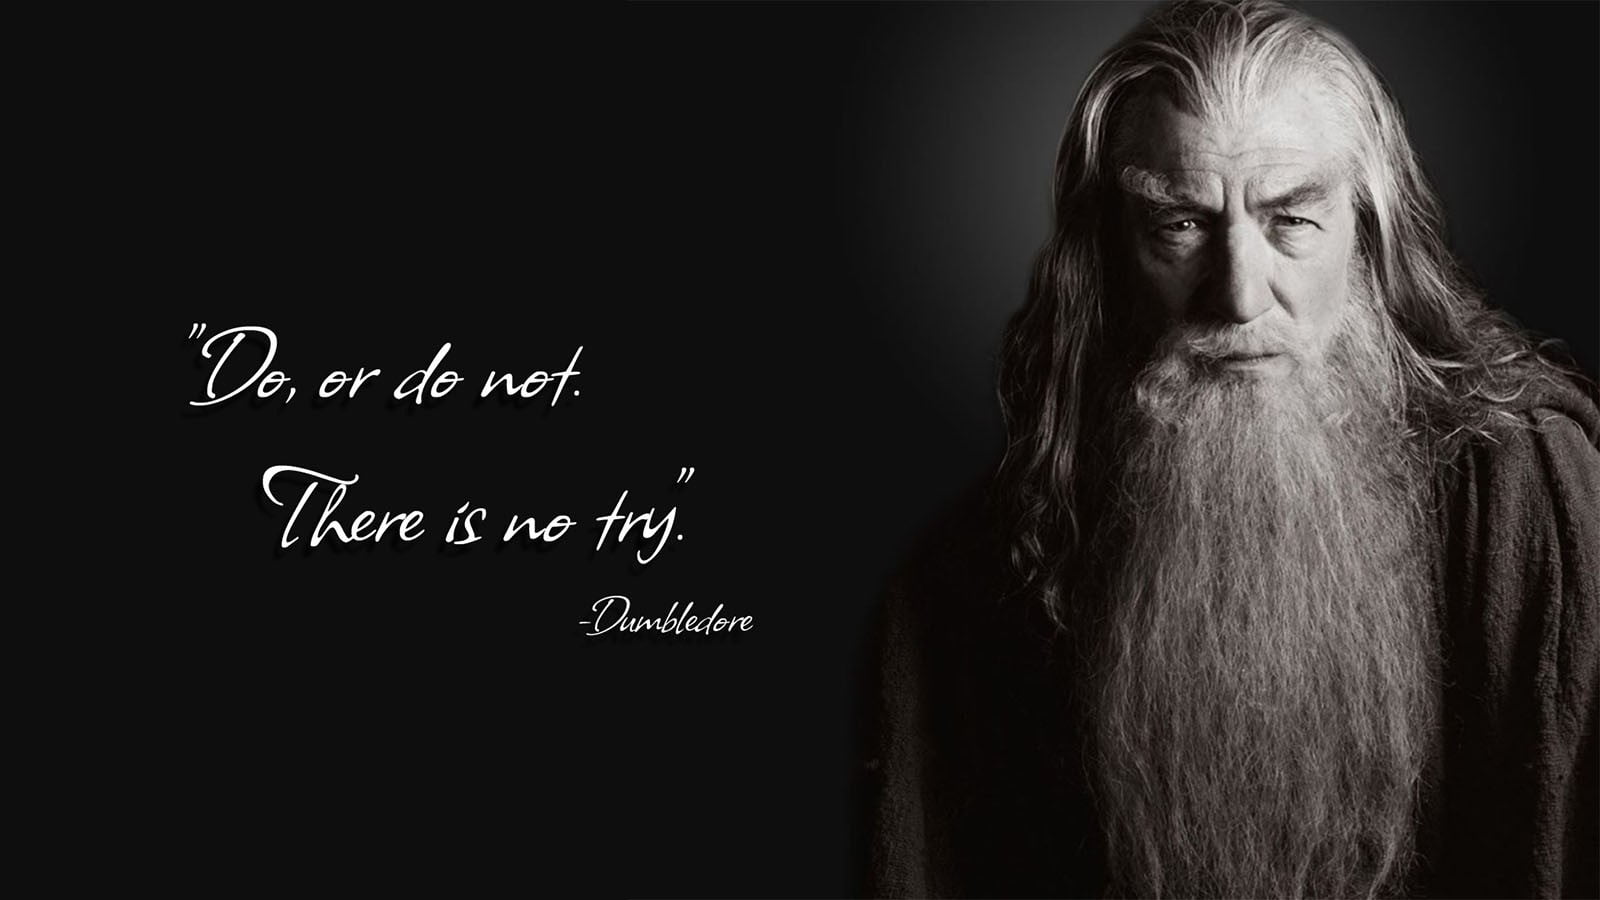 Albus Dumbledore illustration with text overlay, Gandalf, parody, Harry Potter, humor